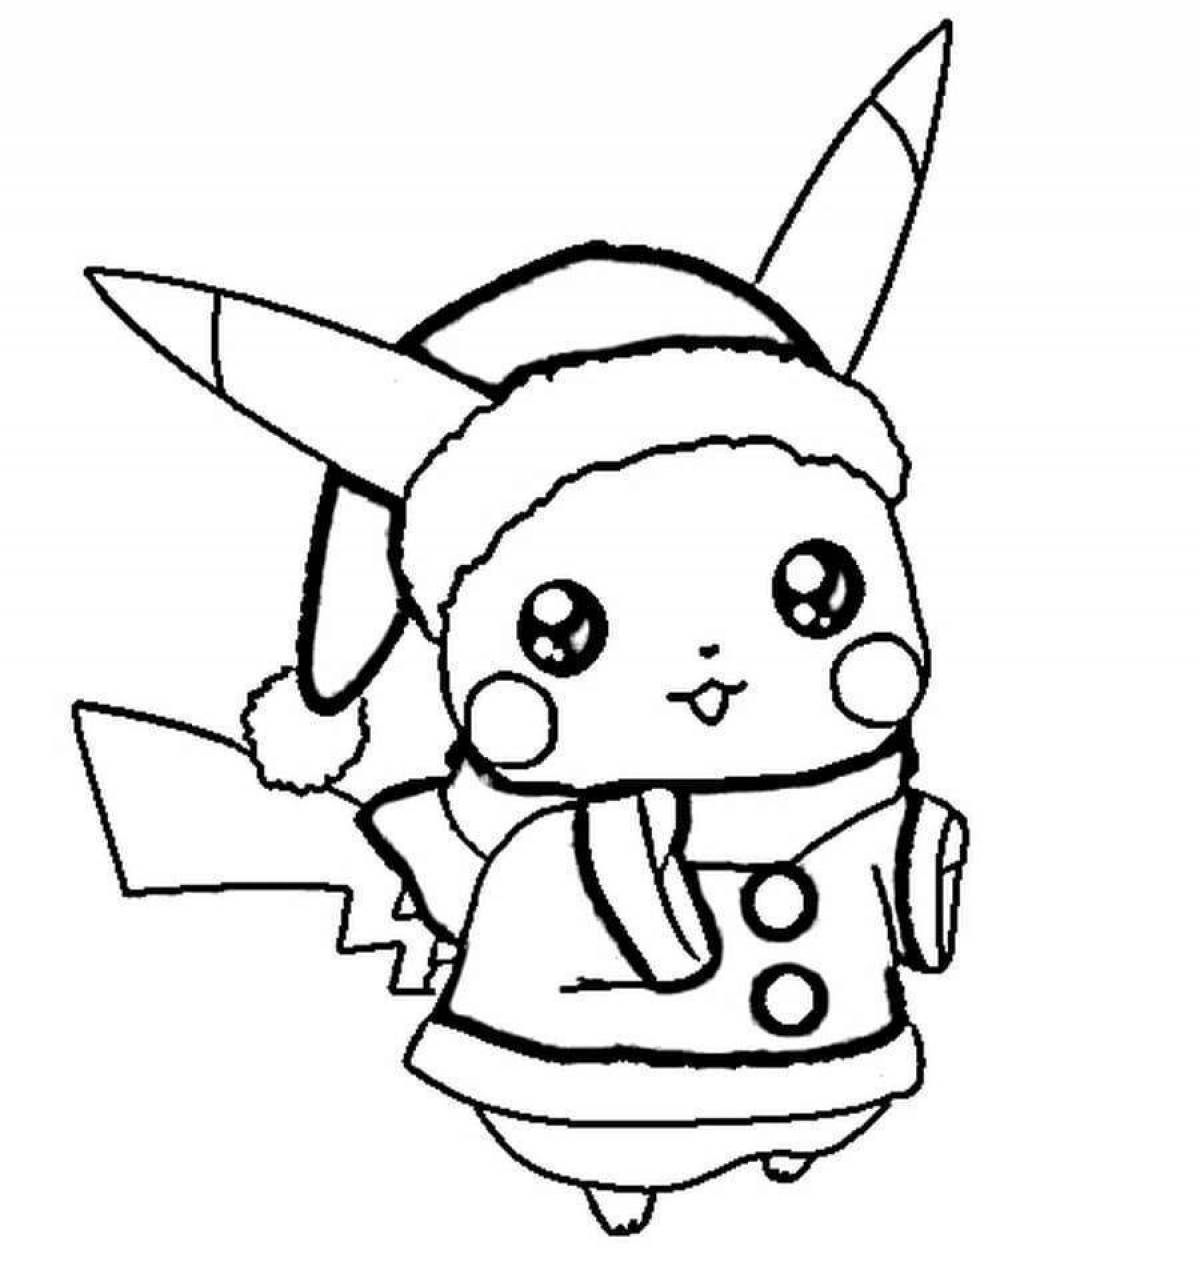 Glorious pikachu coloring pages for girls